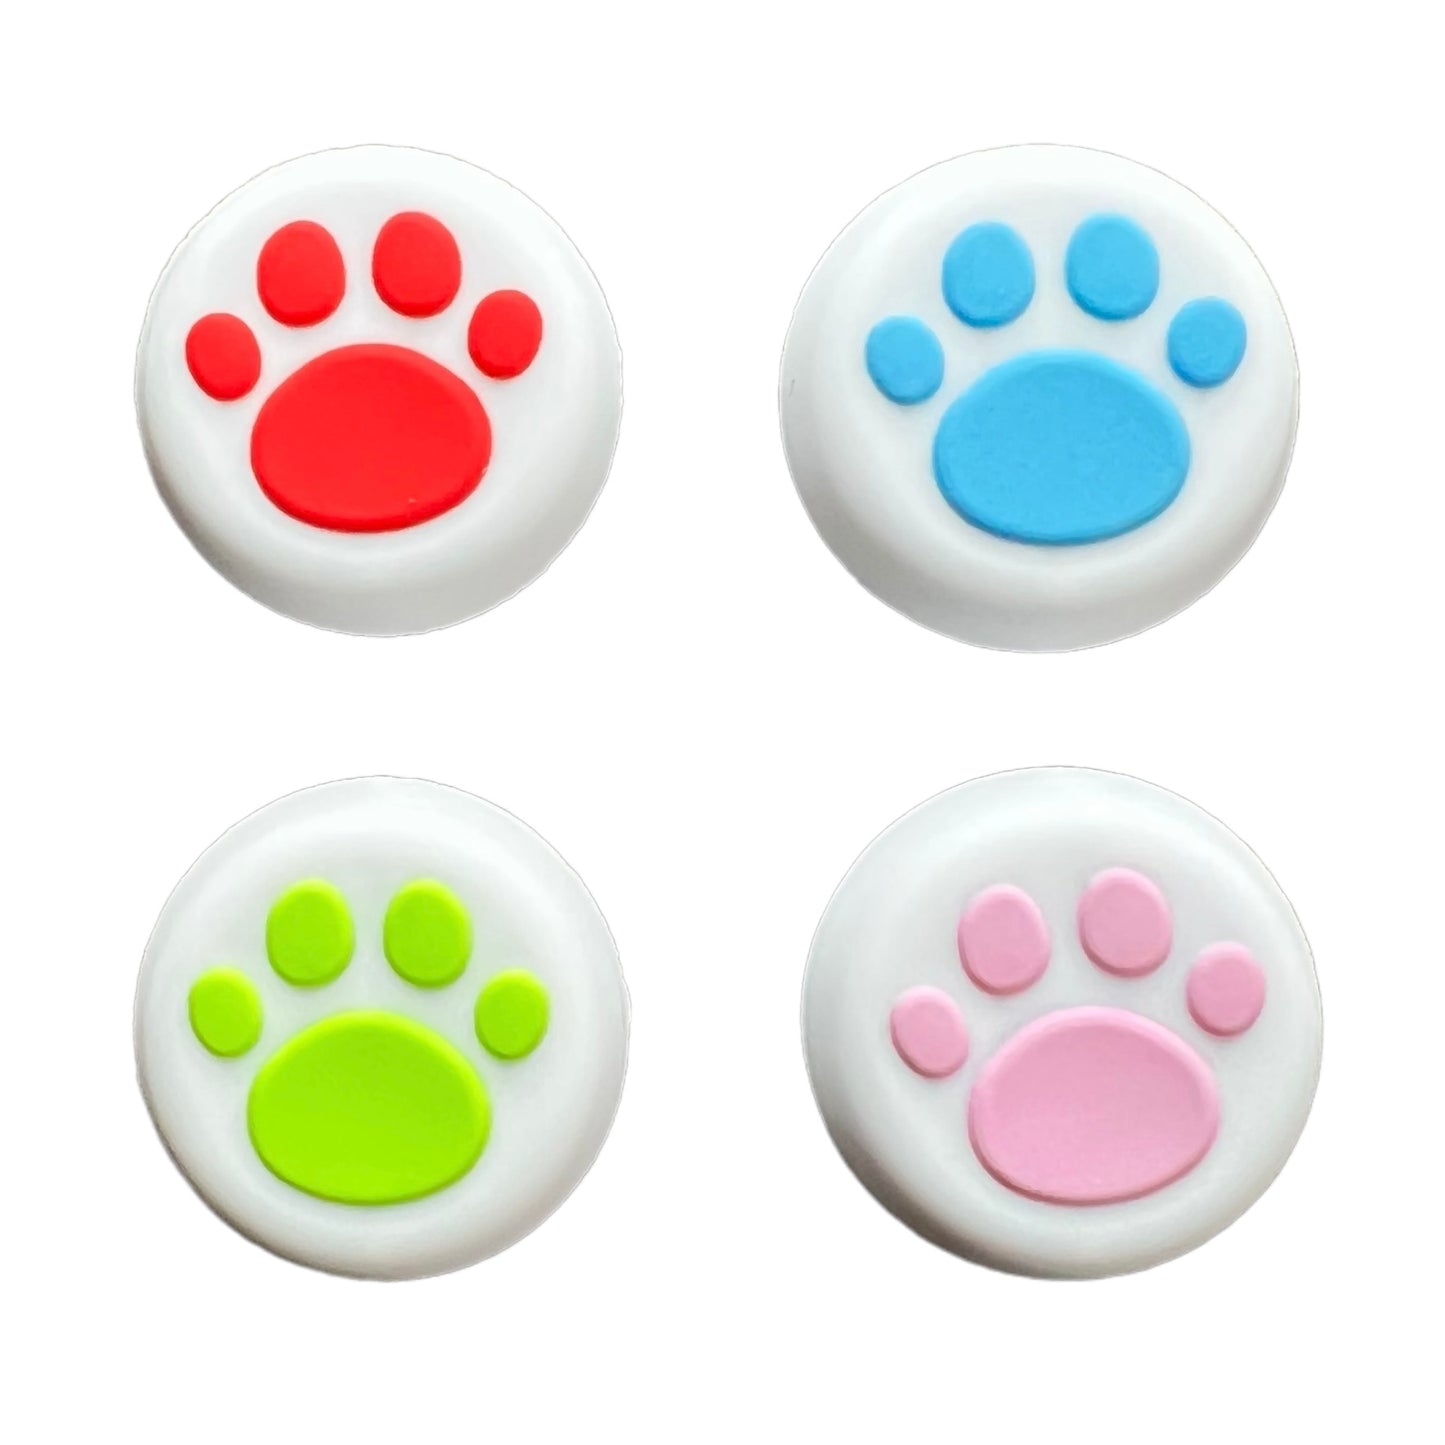 JenDore Pink Green Red Blue White Paws 4Pcs Silicone Thumb Grip Caps for Nintendo Switch Pro, PS5, PS4, and Xbox 360 Controller